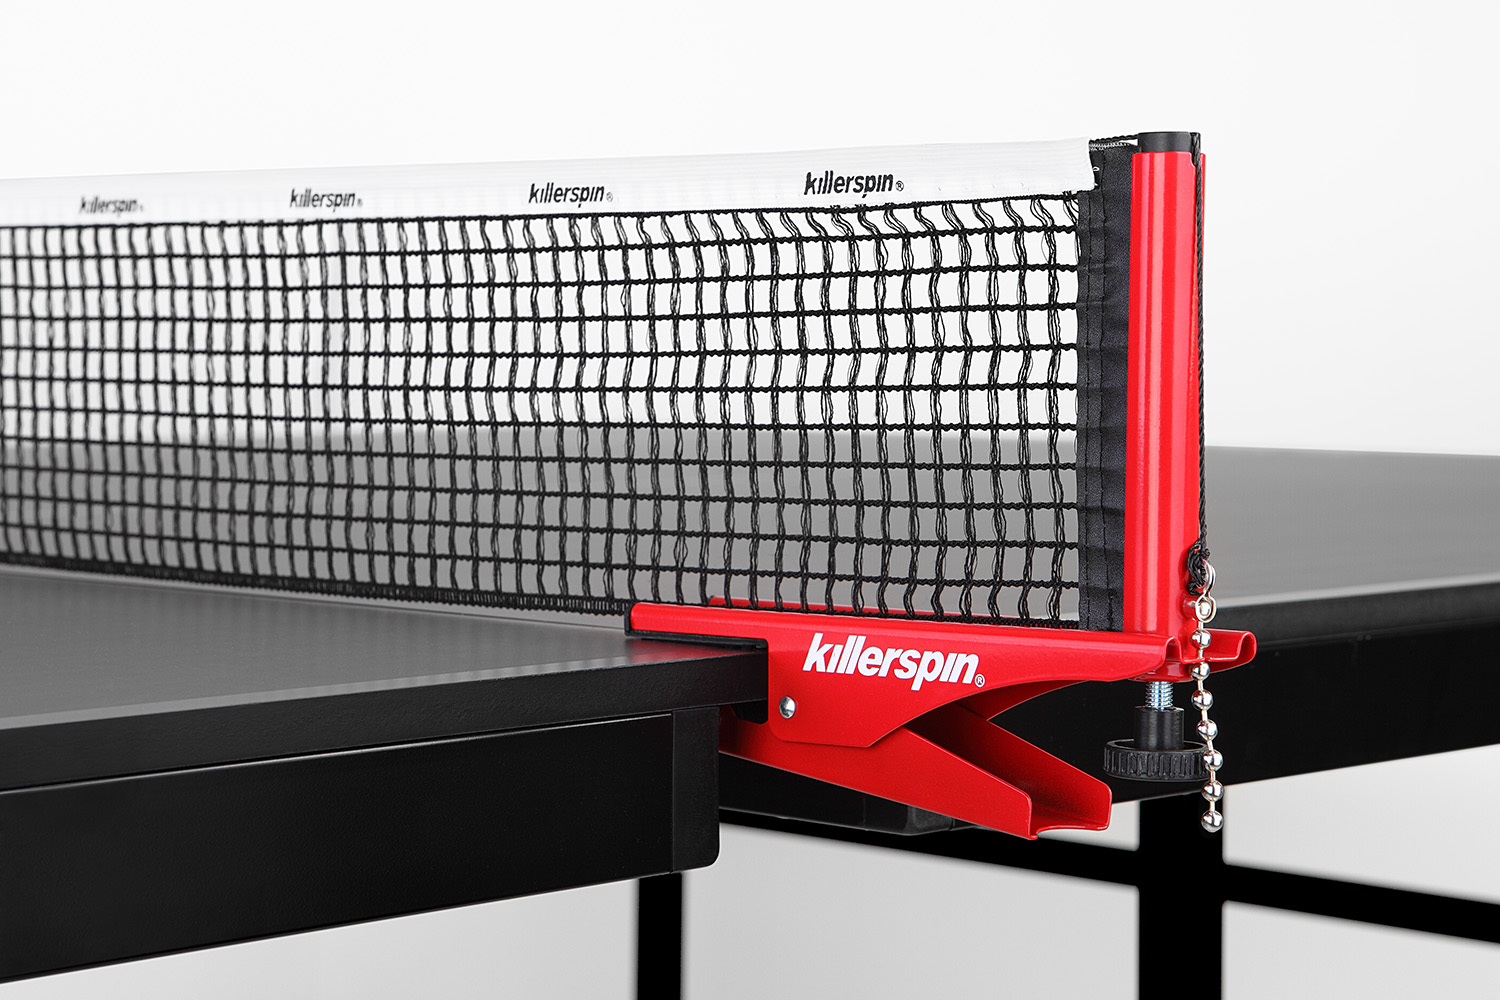 Killerspin MyT4 BlackPocket, ITTF Offcial Size, Folding Indoor Tennis Table, 9' x 5' x 2.5" - image 3 of 9